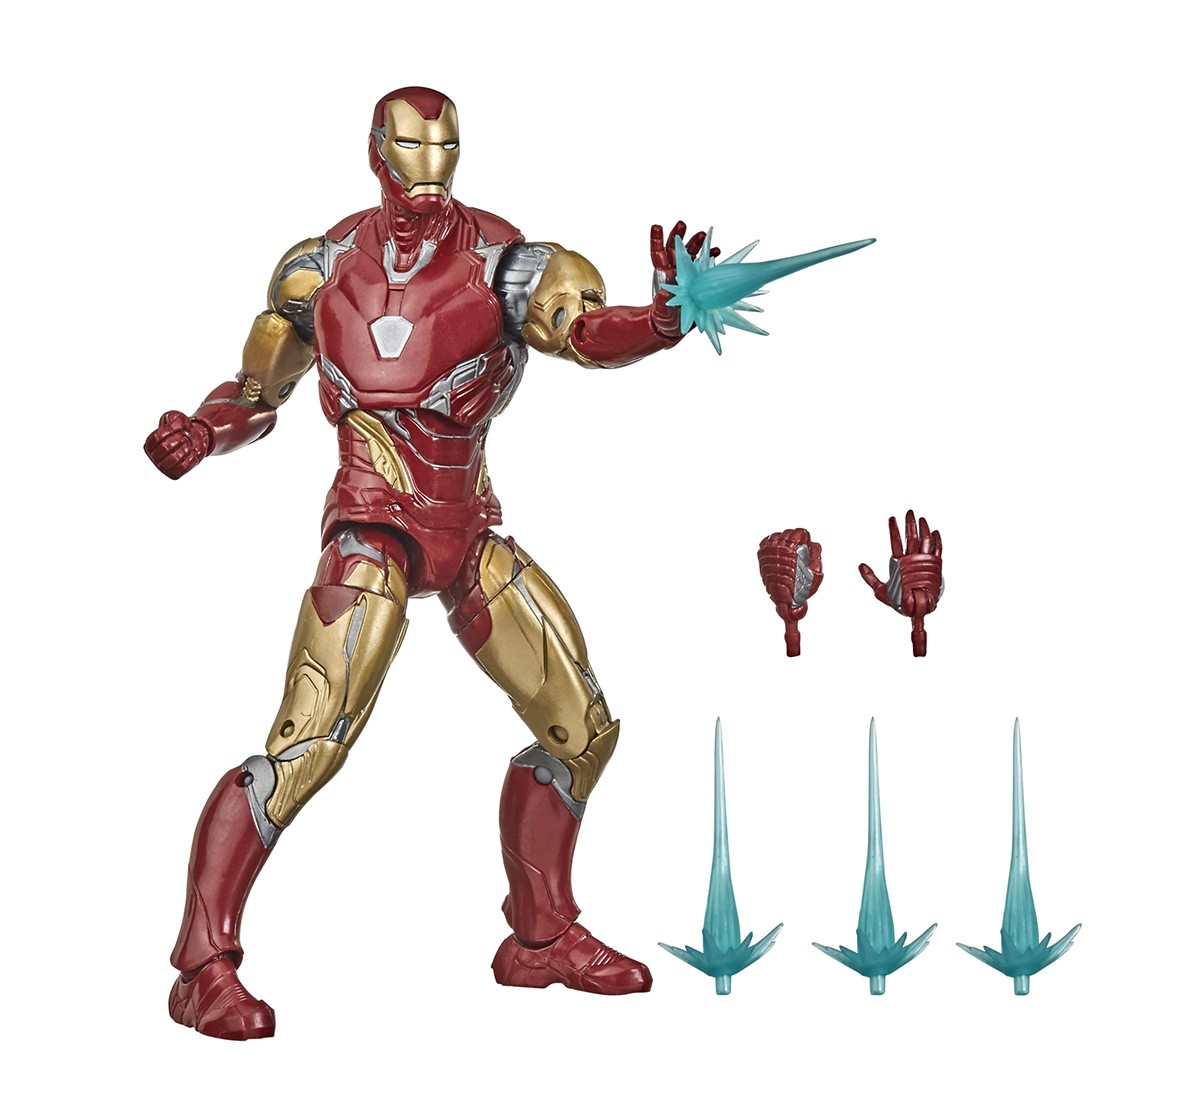 Hasbro Marvel Legends Series Avengers 6-inch Collectible Action Figure Toy Iron Man Mark LXXXV, Premium Design and 4 Accessories Action Figures for age 4Y+ 